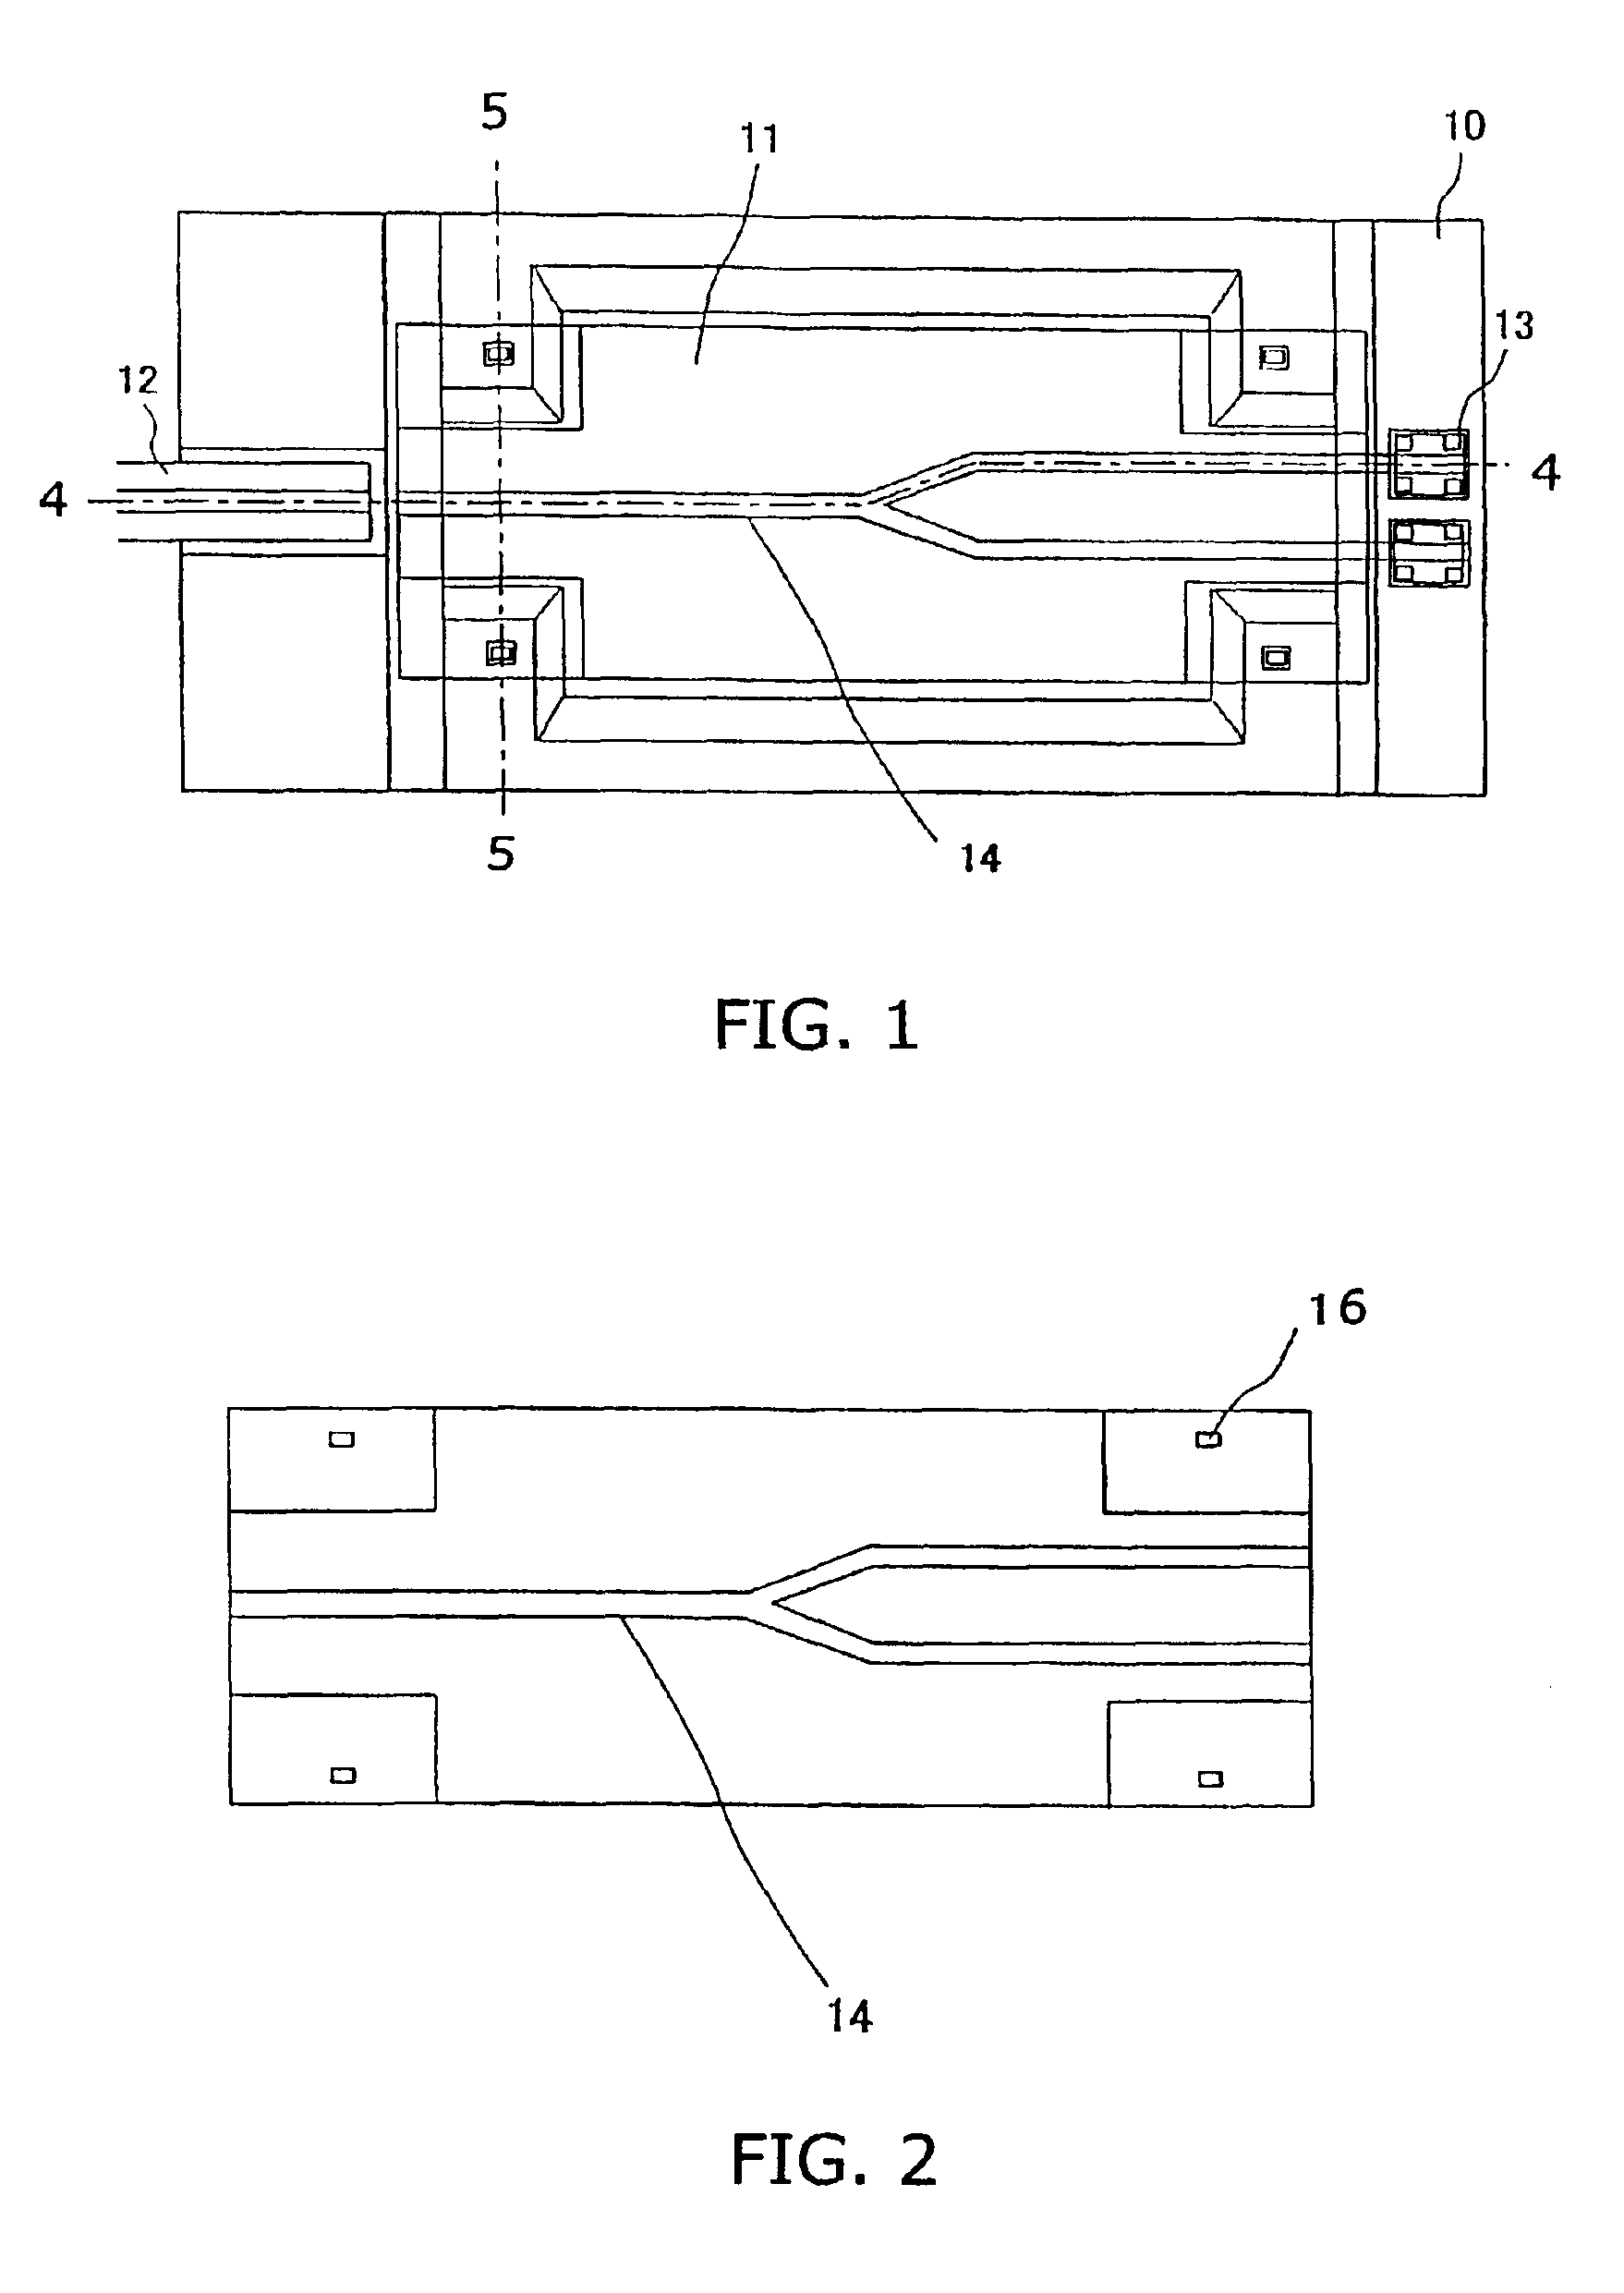 Process for making light waveguide element